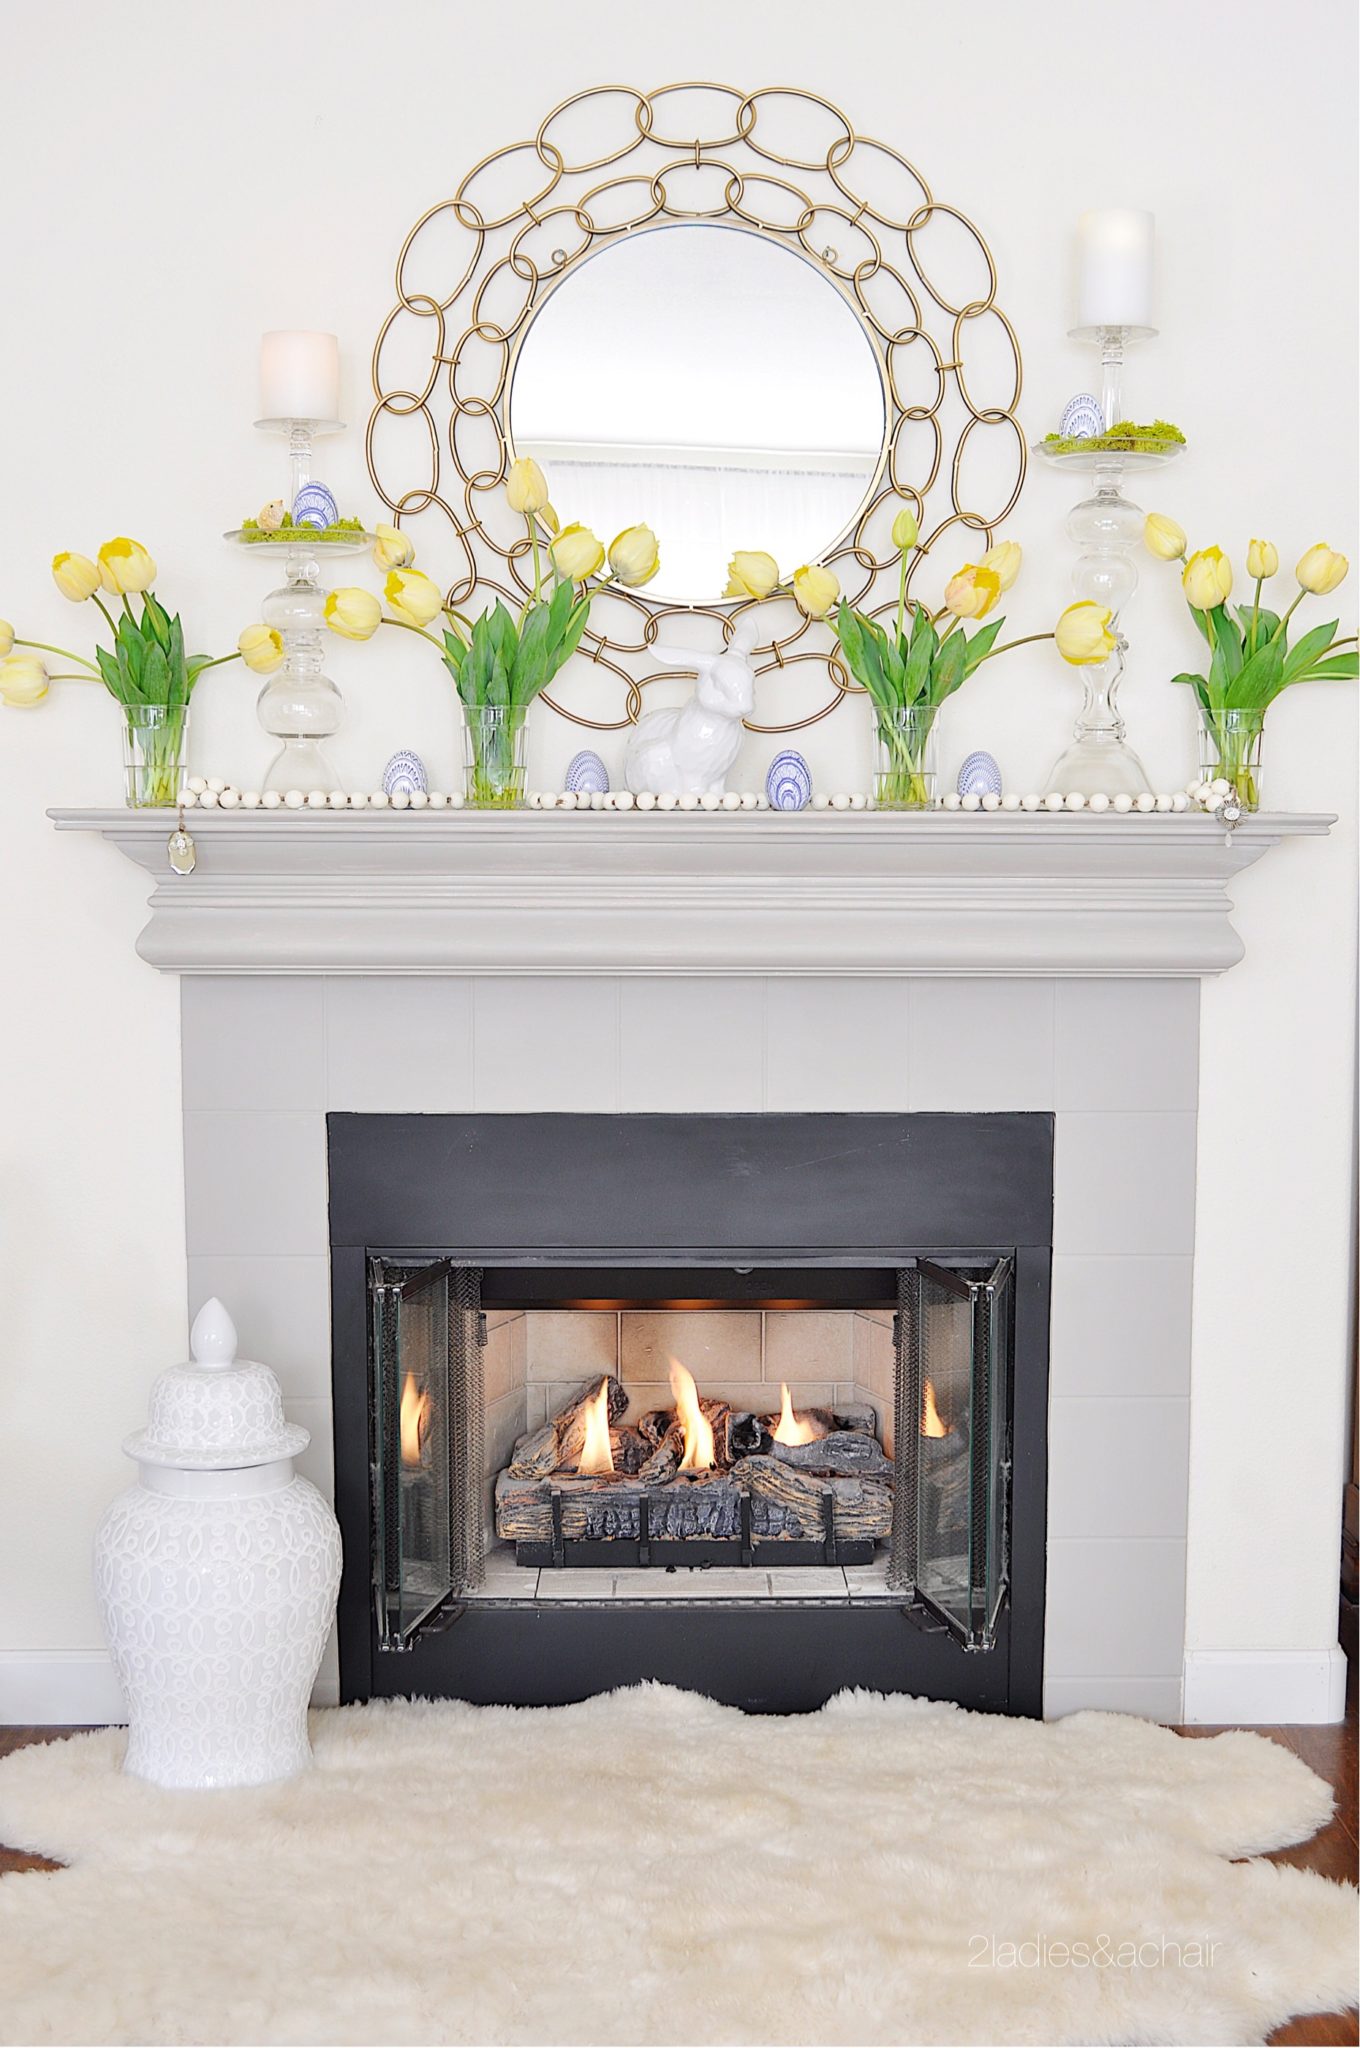 lovely springtime mantel decorations with yellow tulips and a circle mirror